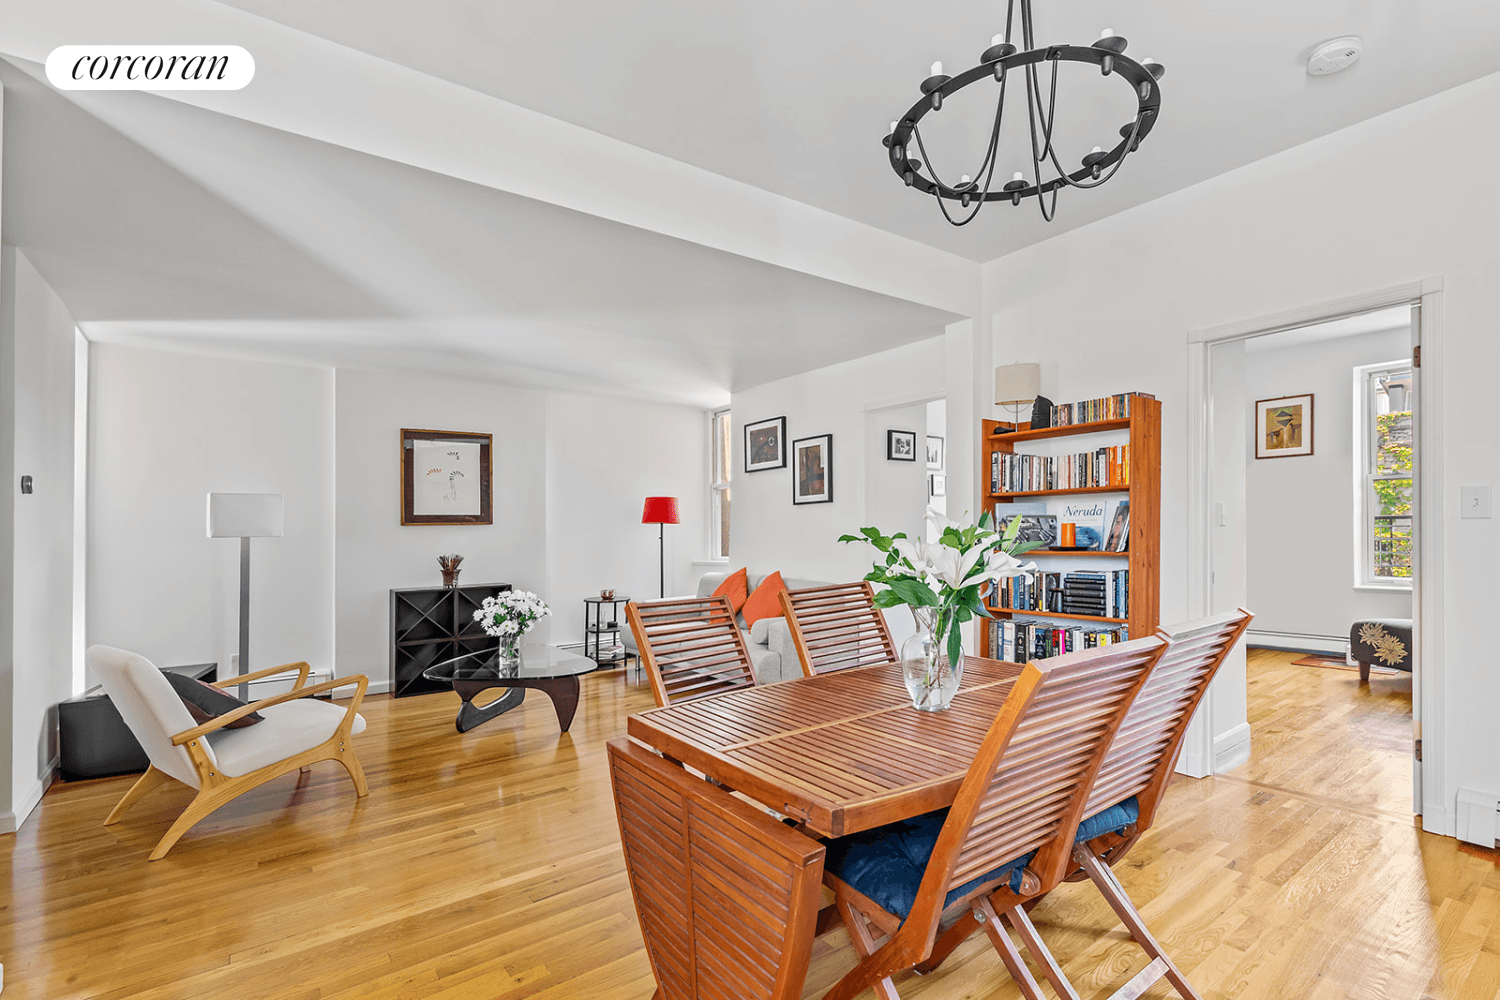 Welcome to 513 12th St. 4, a rare gem of FOUR bedrooms nestled in the heartbeat of South Slope, Brooklyn, and steps to Prospect Park.